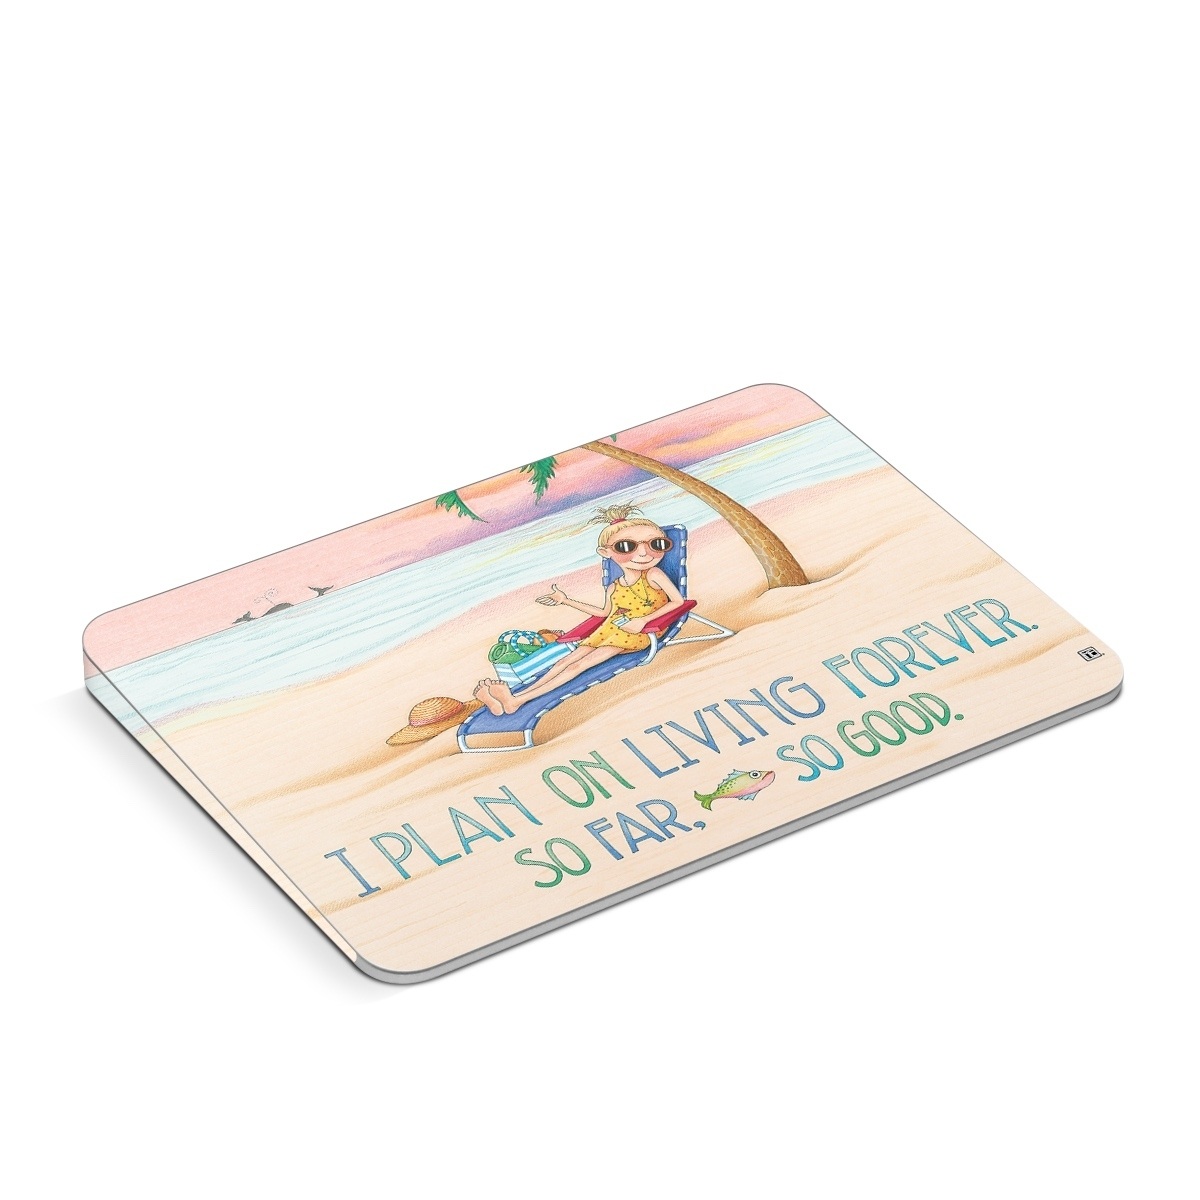 Apple Magic Trackpad Skin design of Vacation, Product, Summer, Aqua, Illustration, Sun tanning, Fictional character, Caribbean, Graphics, Happy, with pink, green, brown, yellow, blue, white, red colors